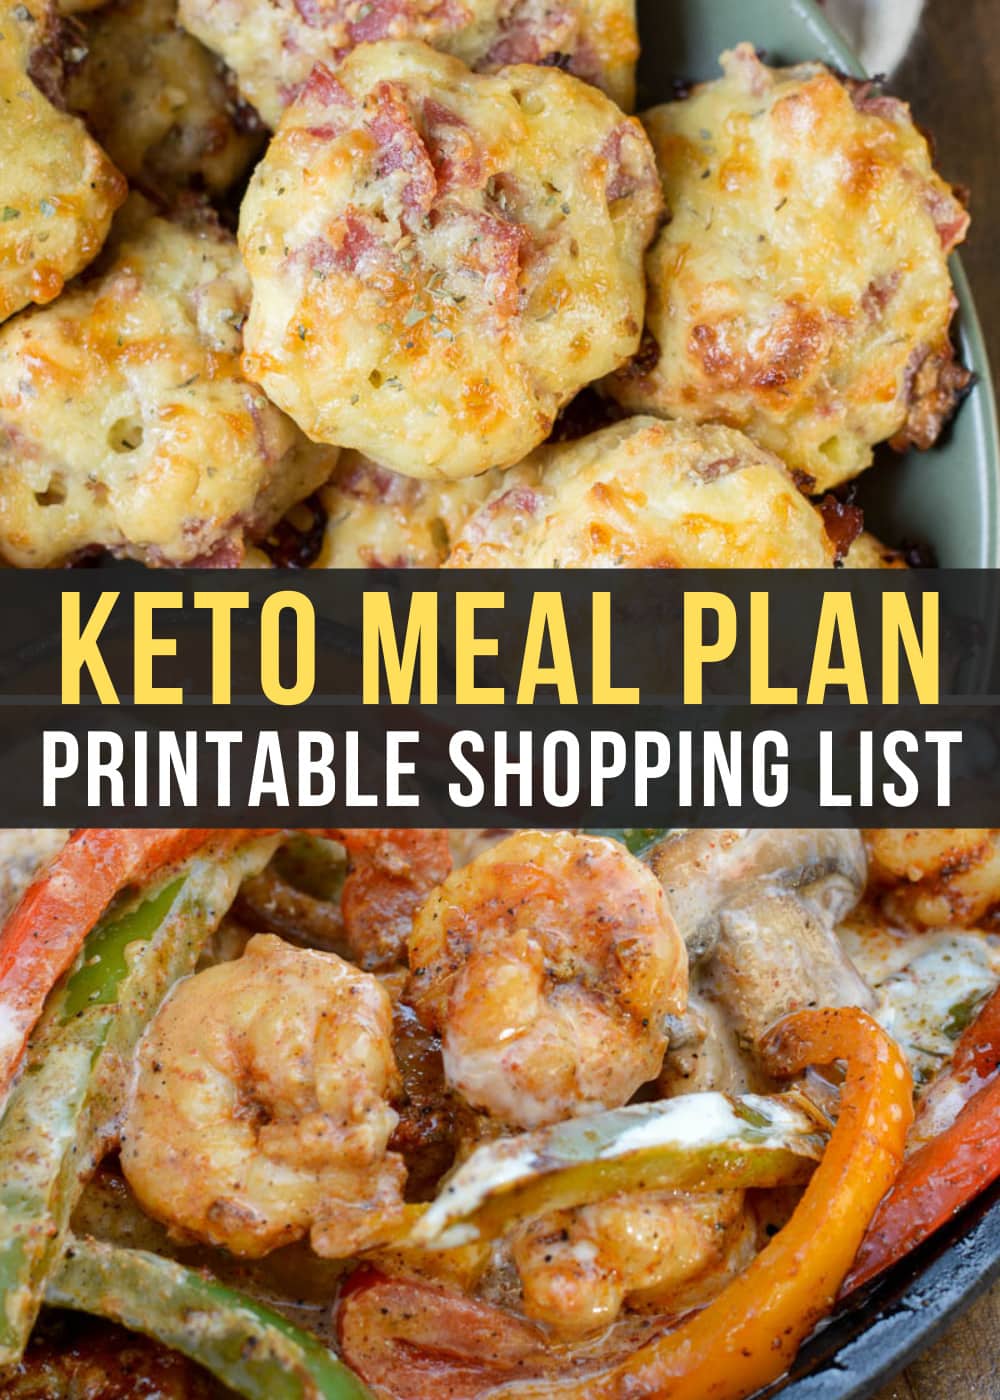 This Easy Keto Meal Plan includes 5 delicious keto dinners and a delicious low-carb dessert recipe! Use the printable shopping list and meal prep tips for a simple week on keto!